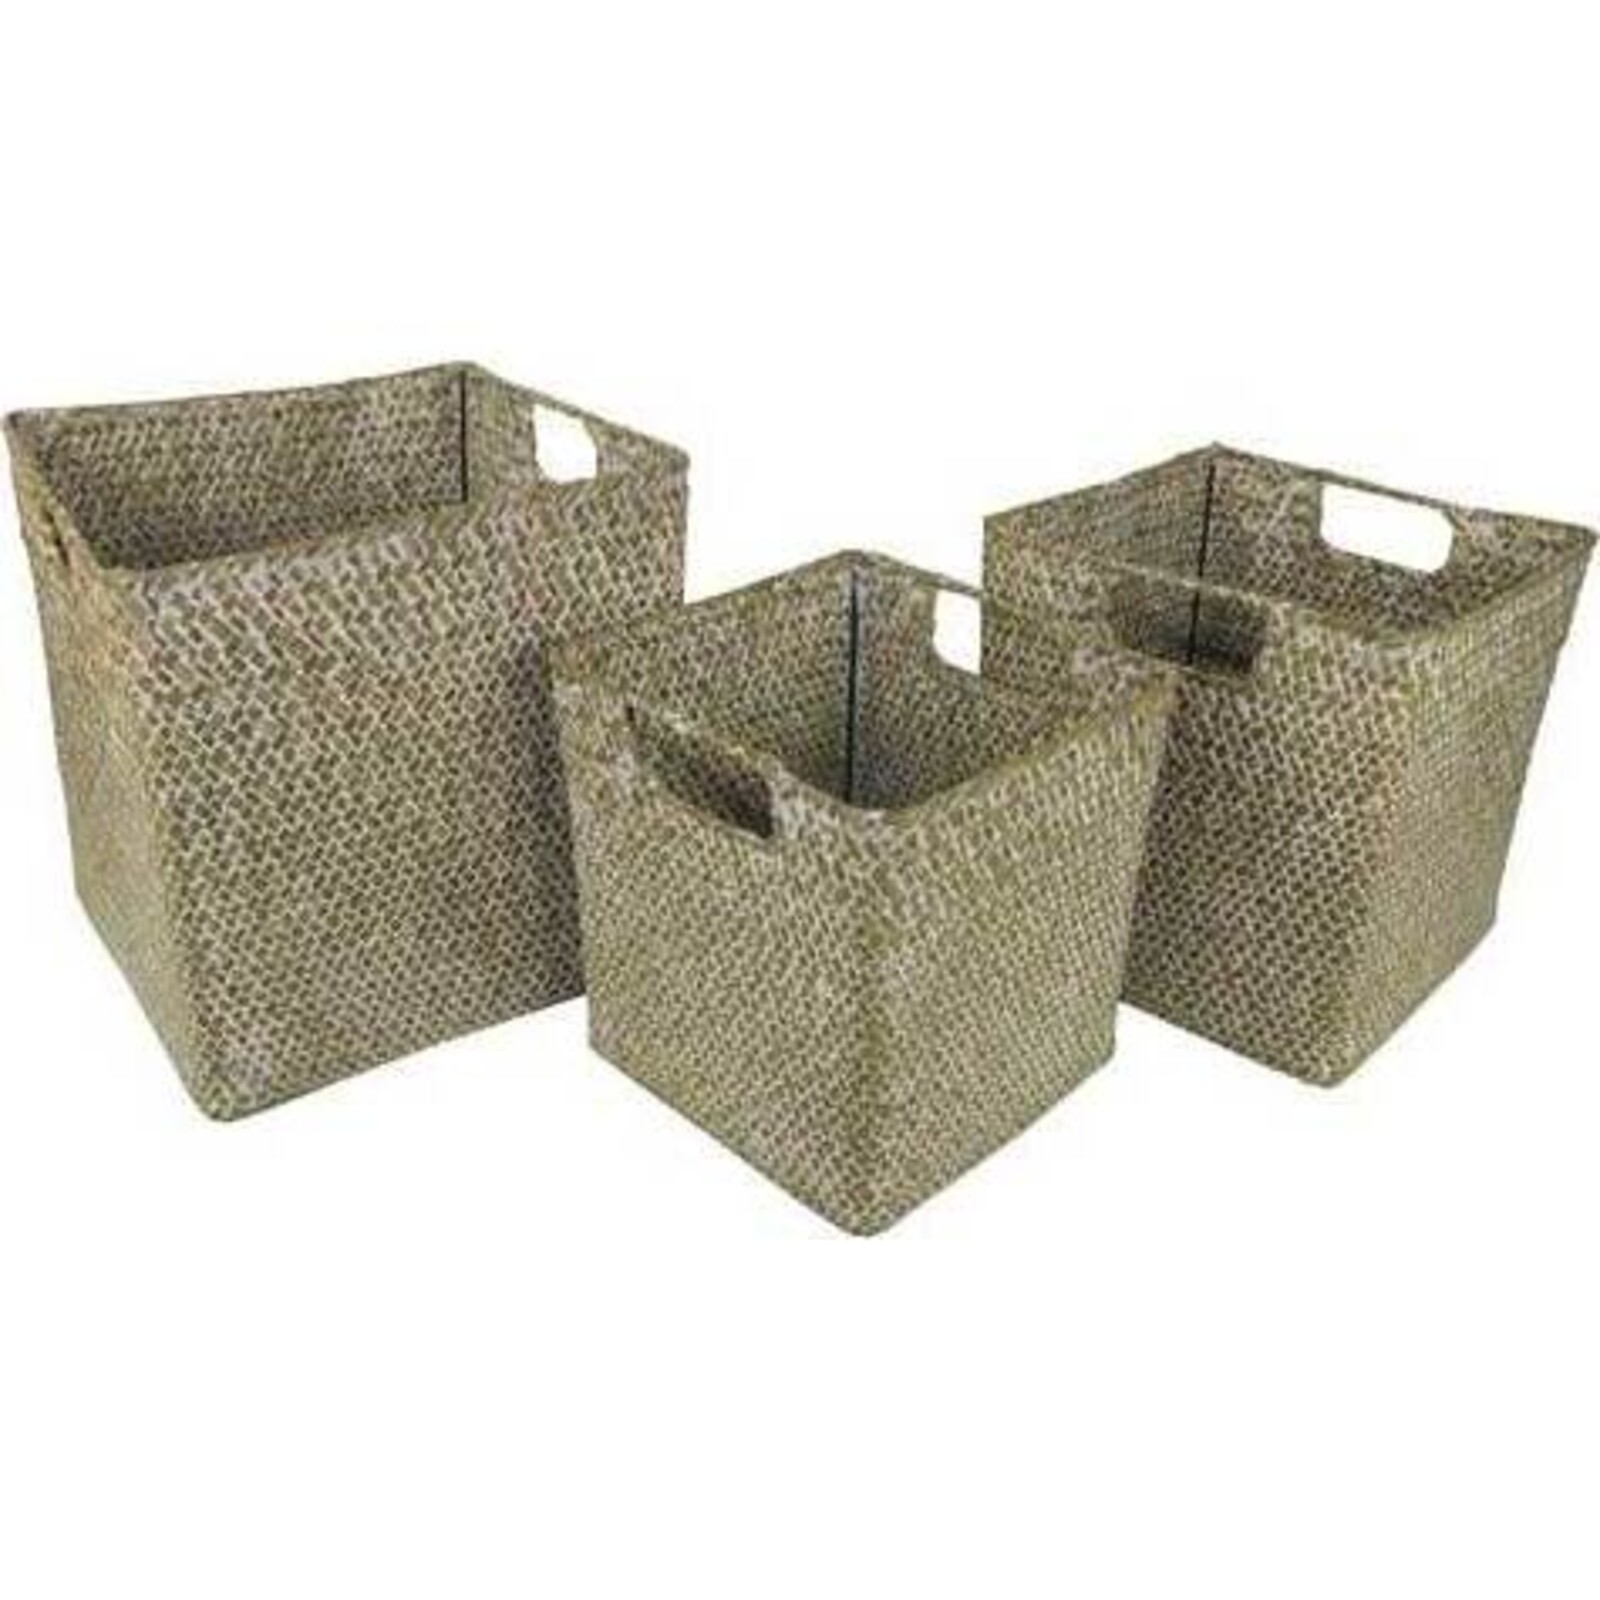 Woven Basket Square S/3